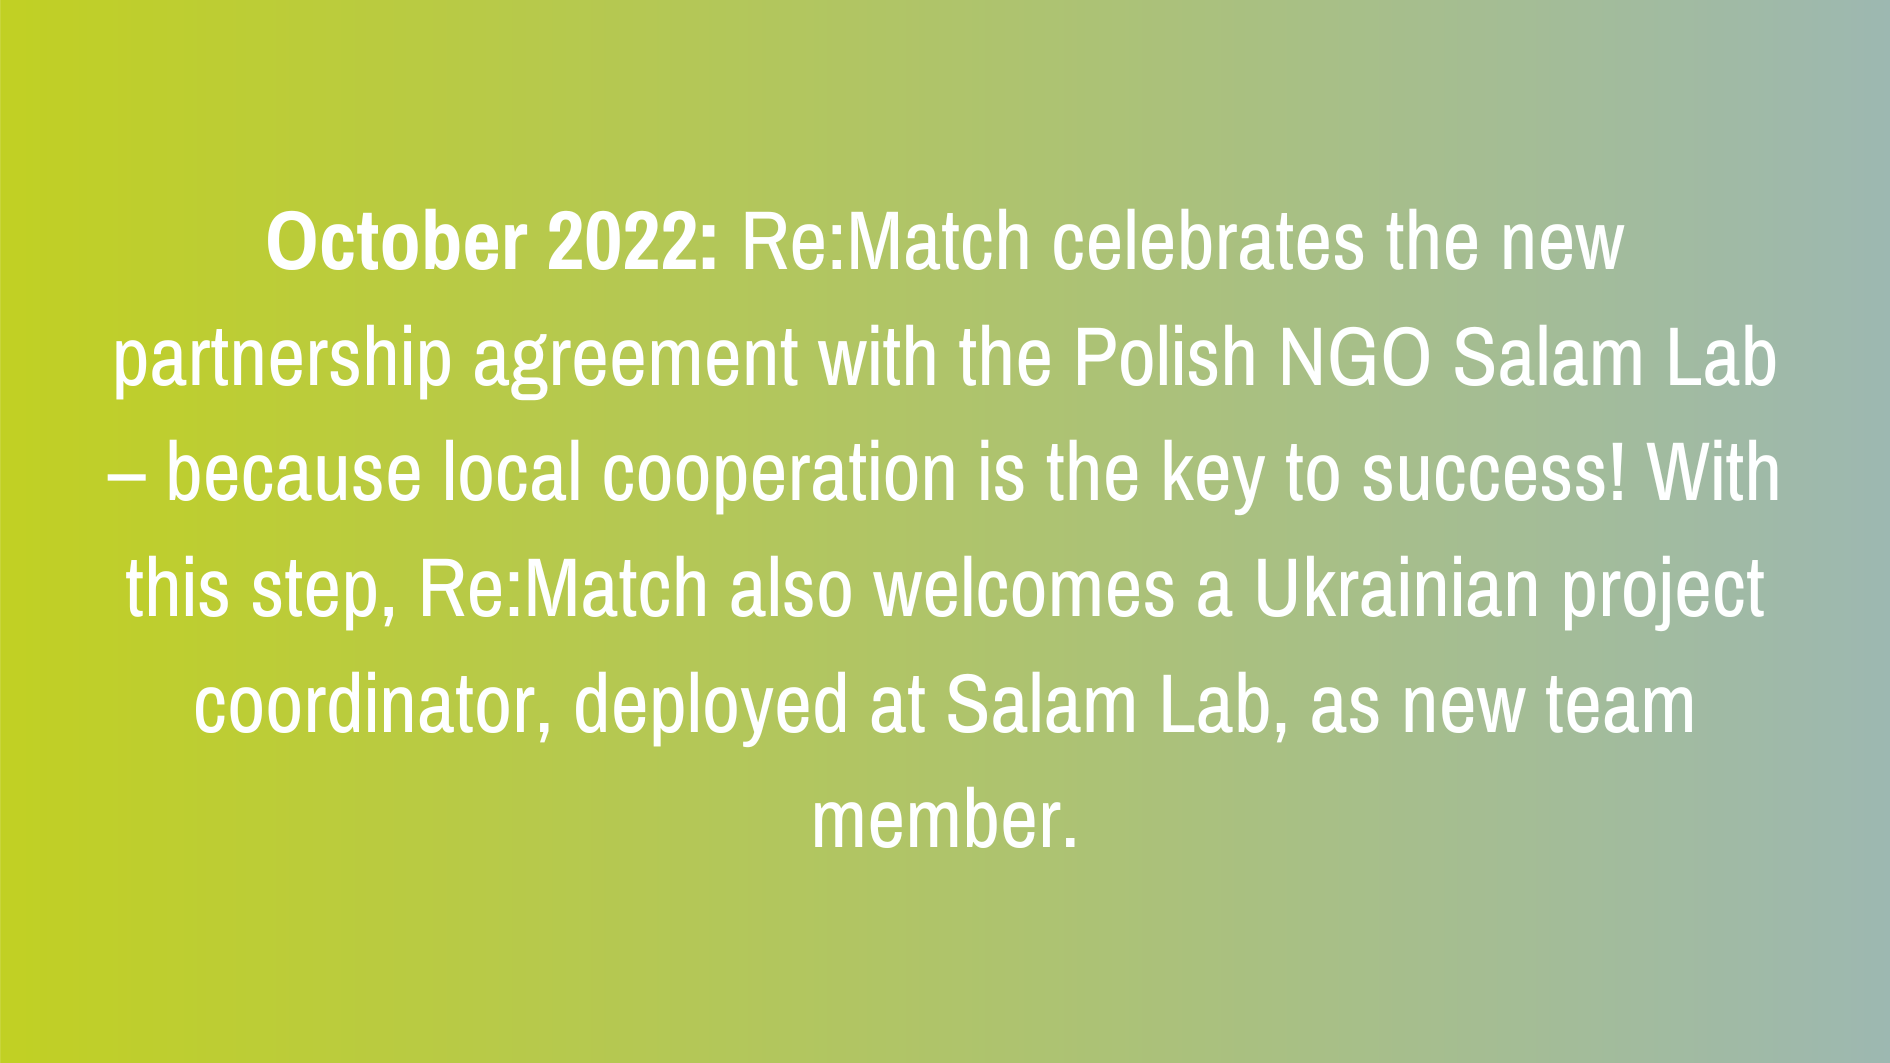 October 2022: Re:Match celebrates the new partnership agreement with the Polish NGO Salam Lab – because local cooperation is the key to success! With this step, Re:Match also welcomes a Ukrainian project coordinator, deployed at Salam Lab, as new team member.